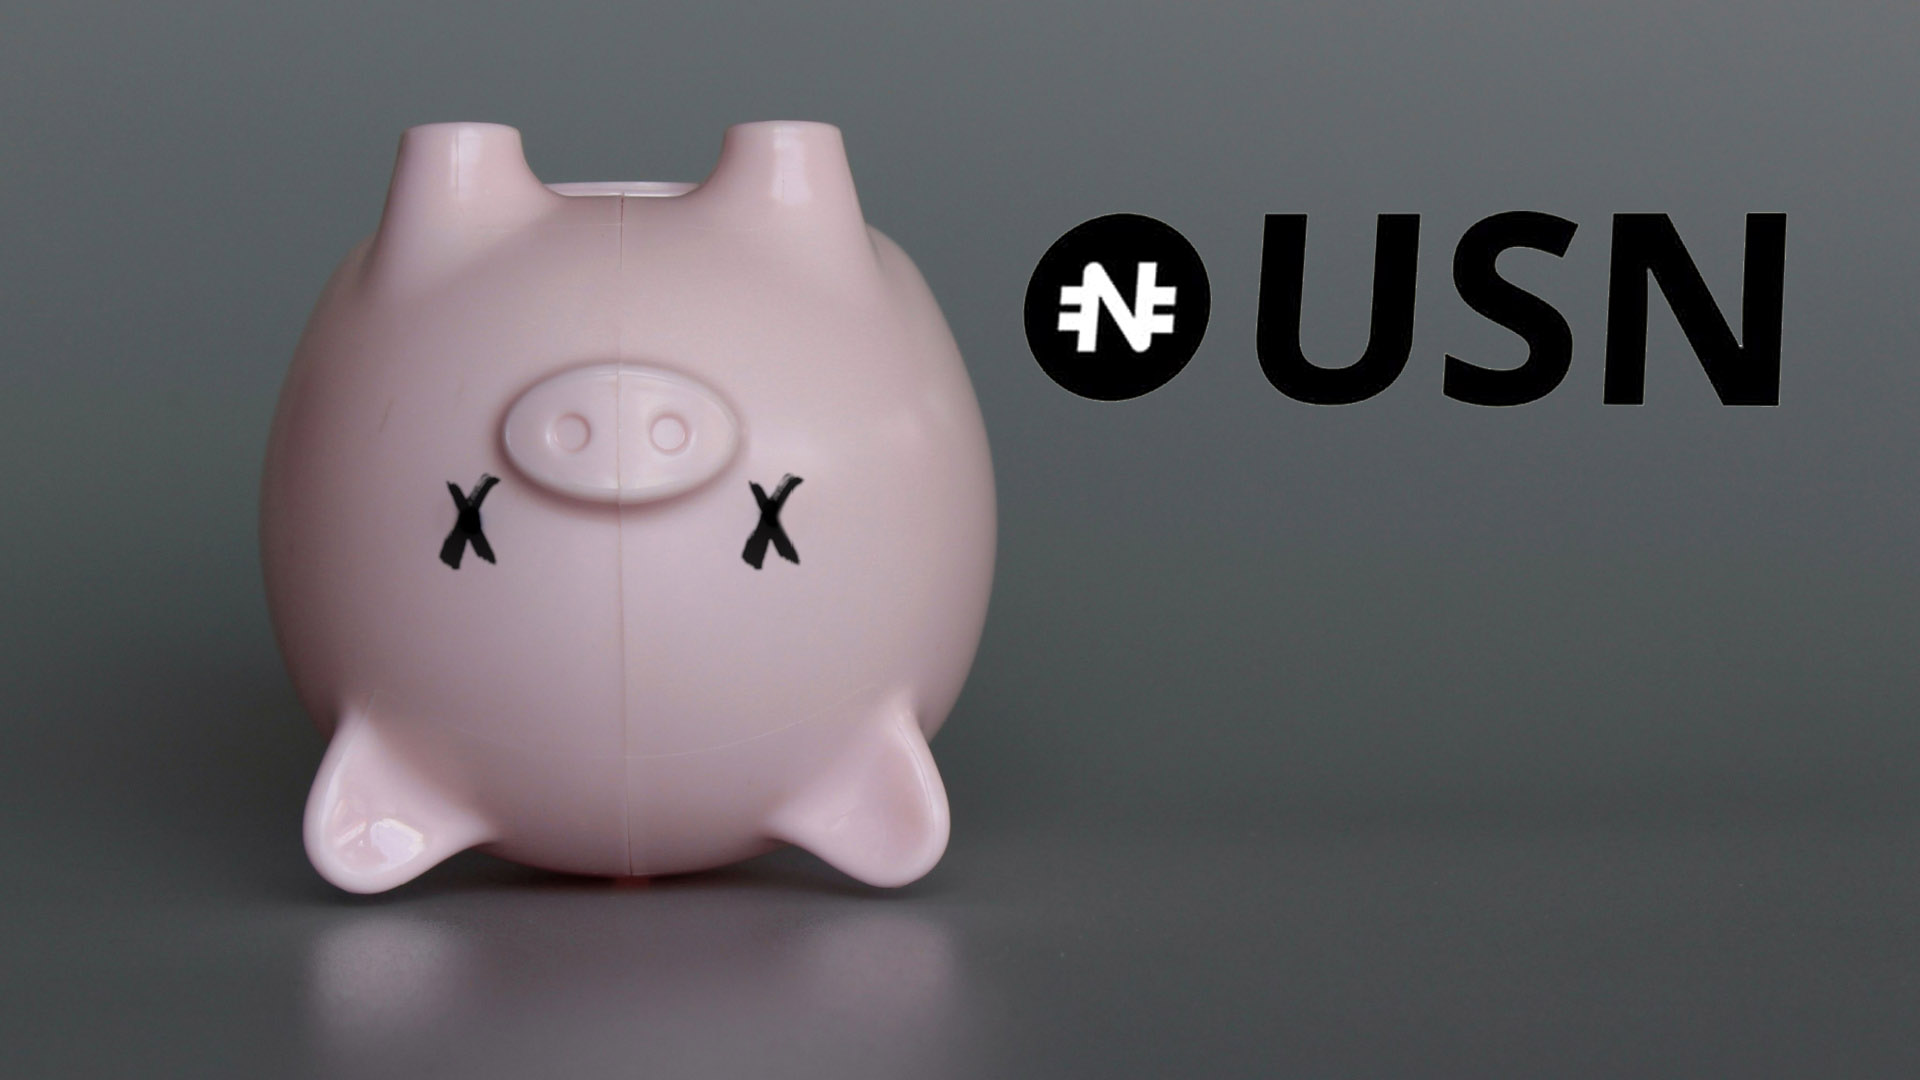 Near – Internal crisis linked to the failure of the stablecoin USN